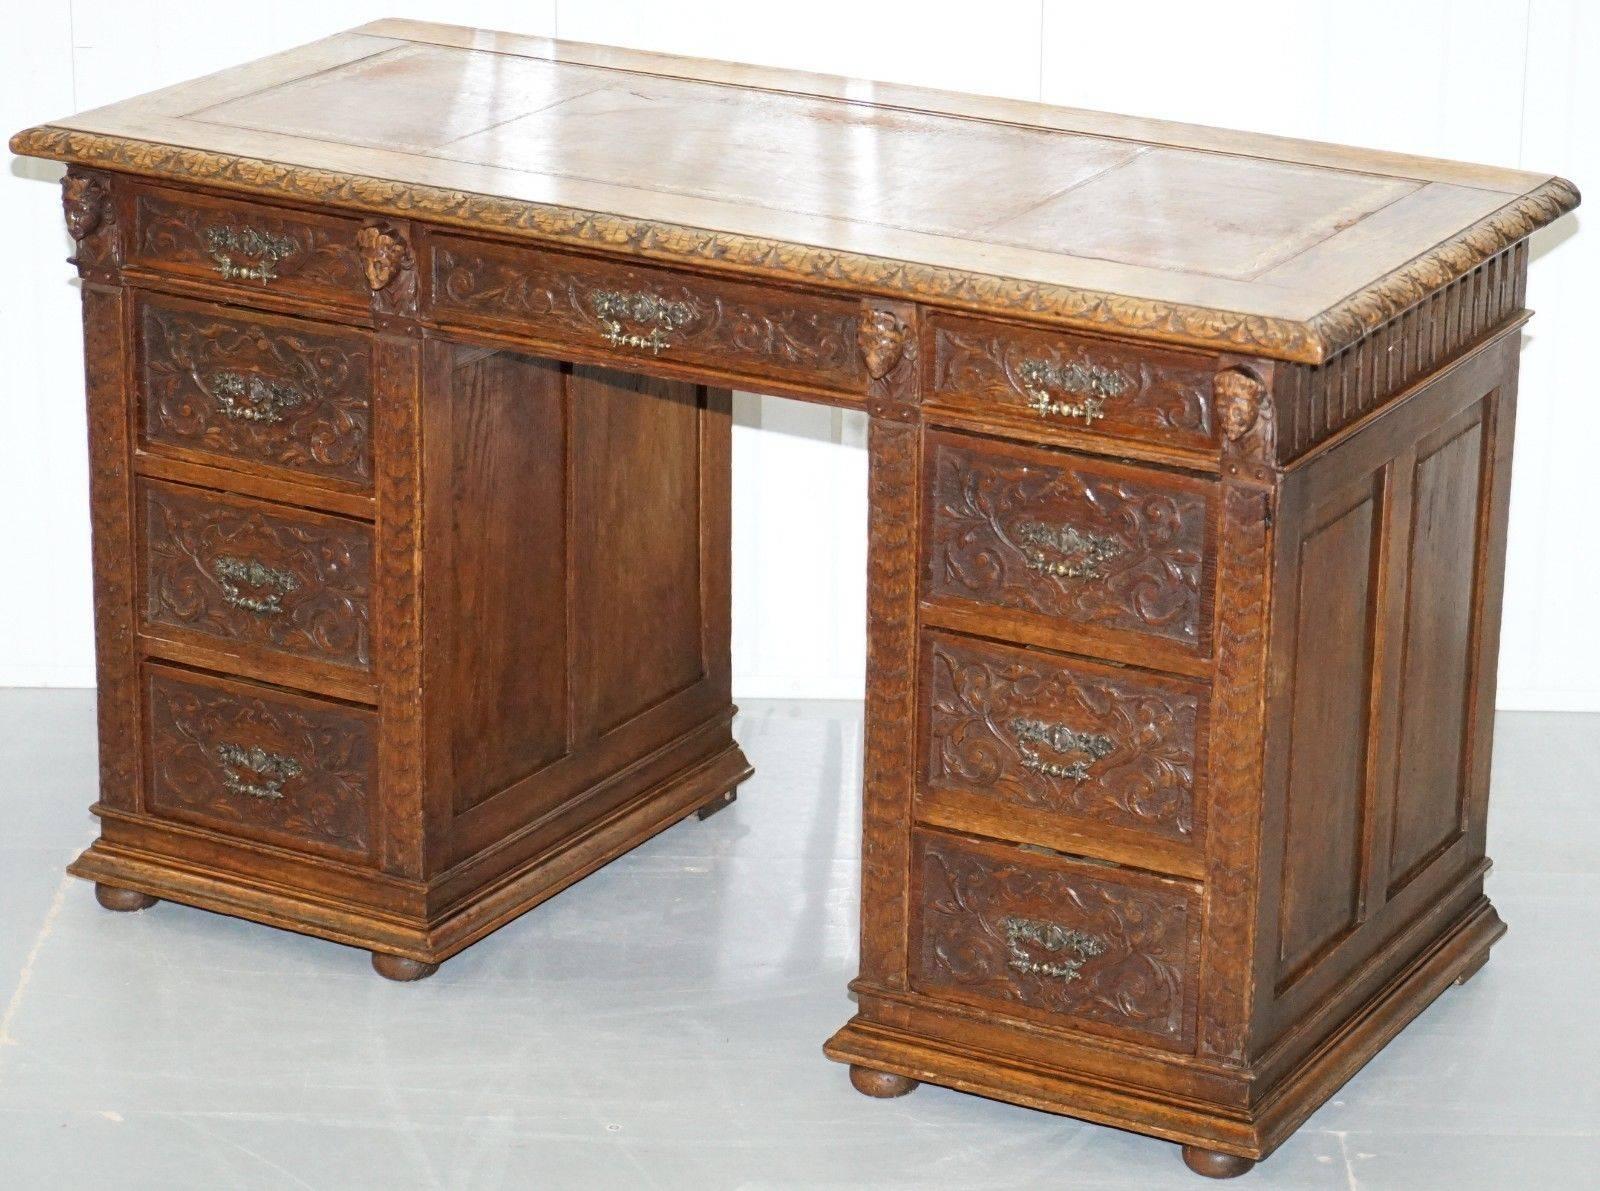 We are delighted to offer for sale this lovely handmade and carved in England twin pedestal desk made in the Gothic manor, circa 1800.

One exceptionally carved and worked piece, the handles are very ornate and solid brass, the almost neoclassical